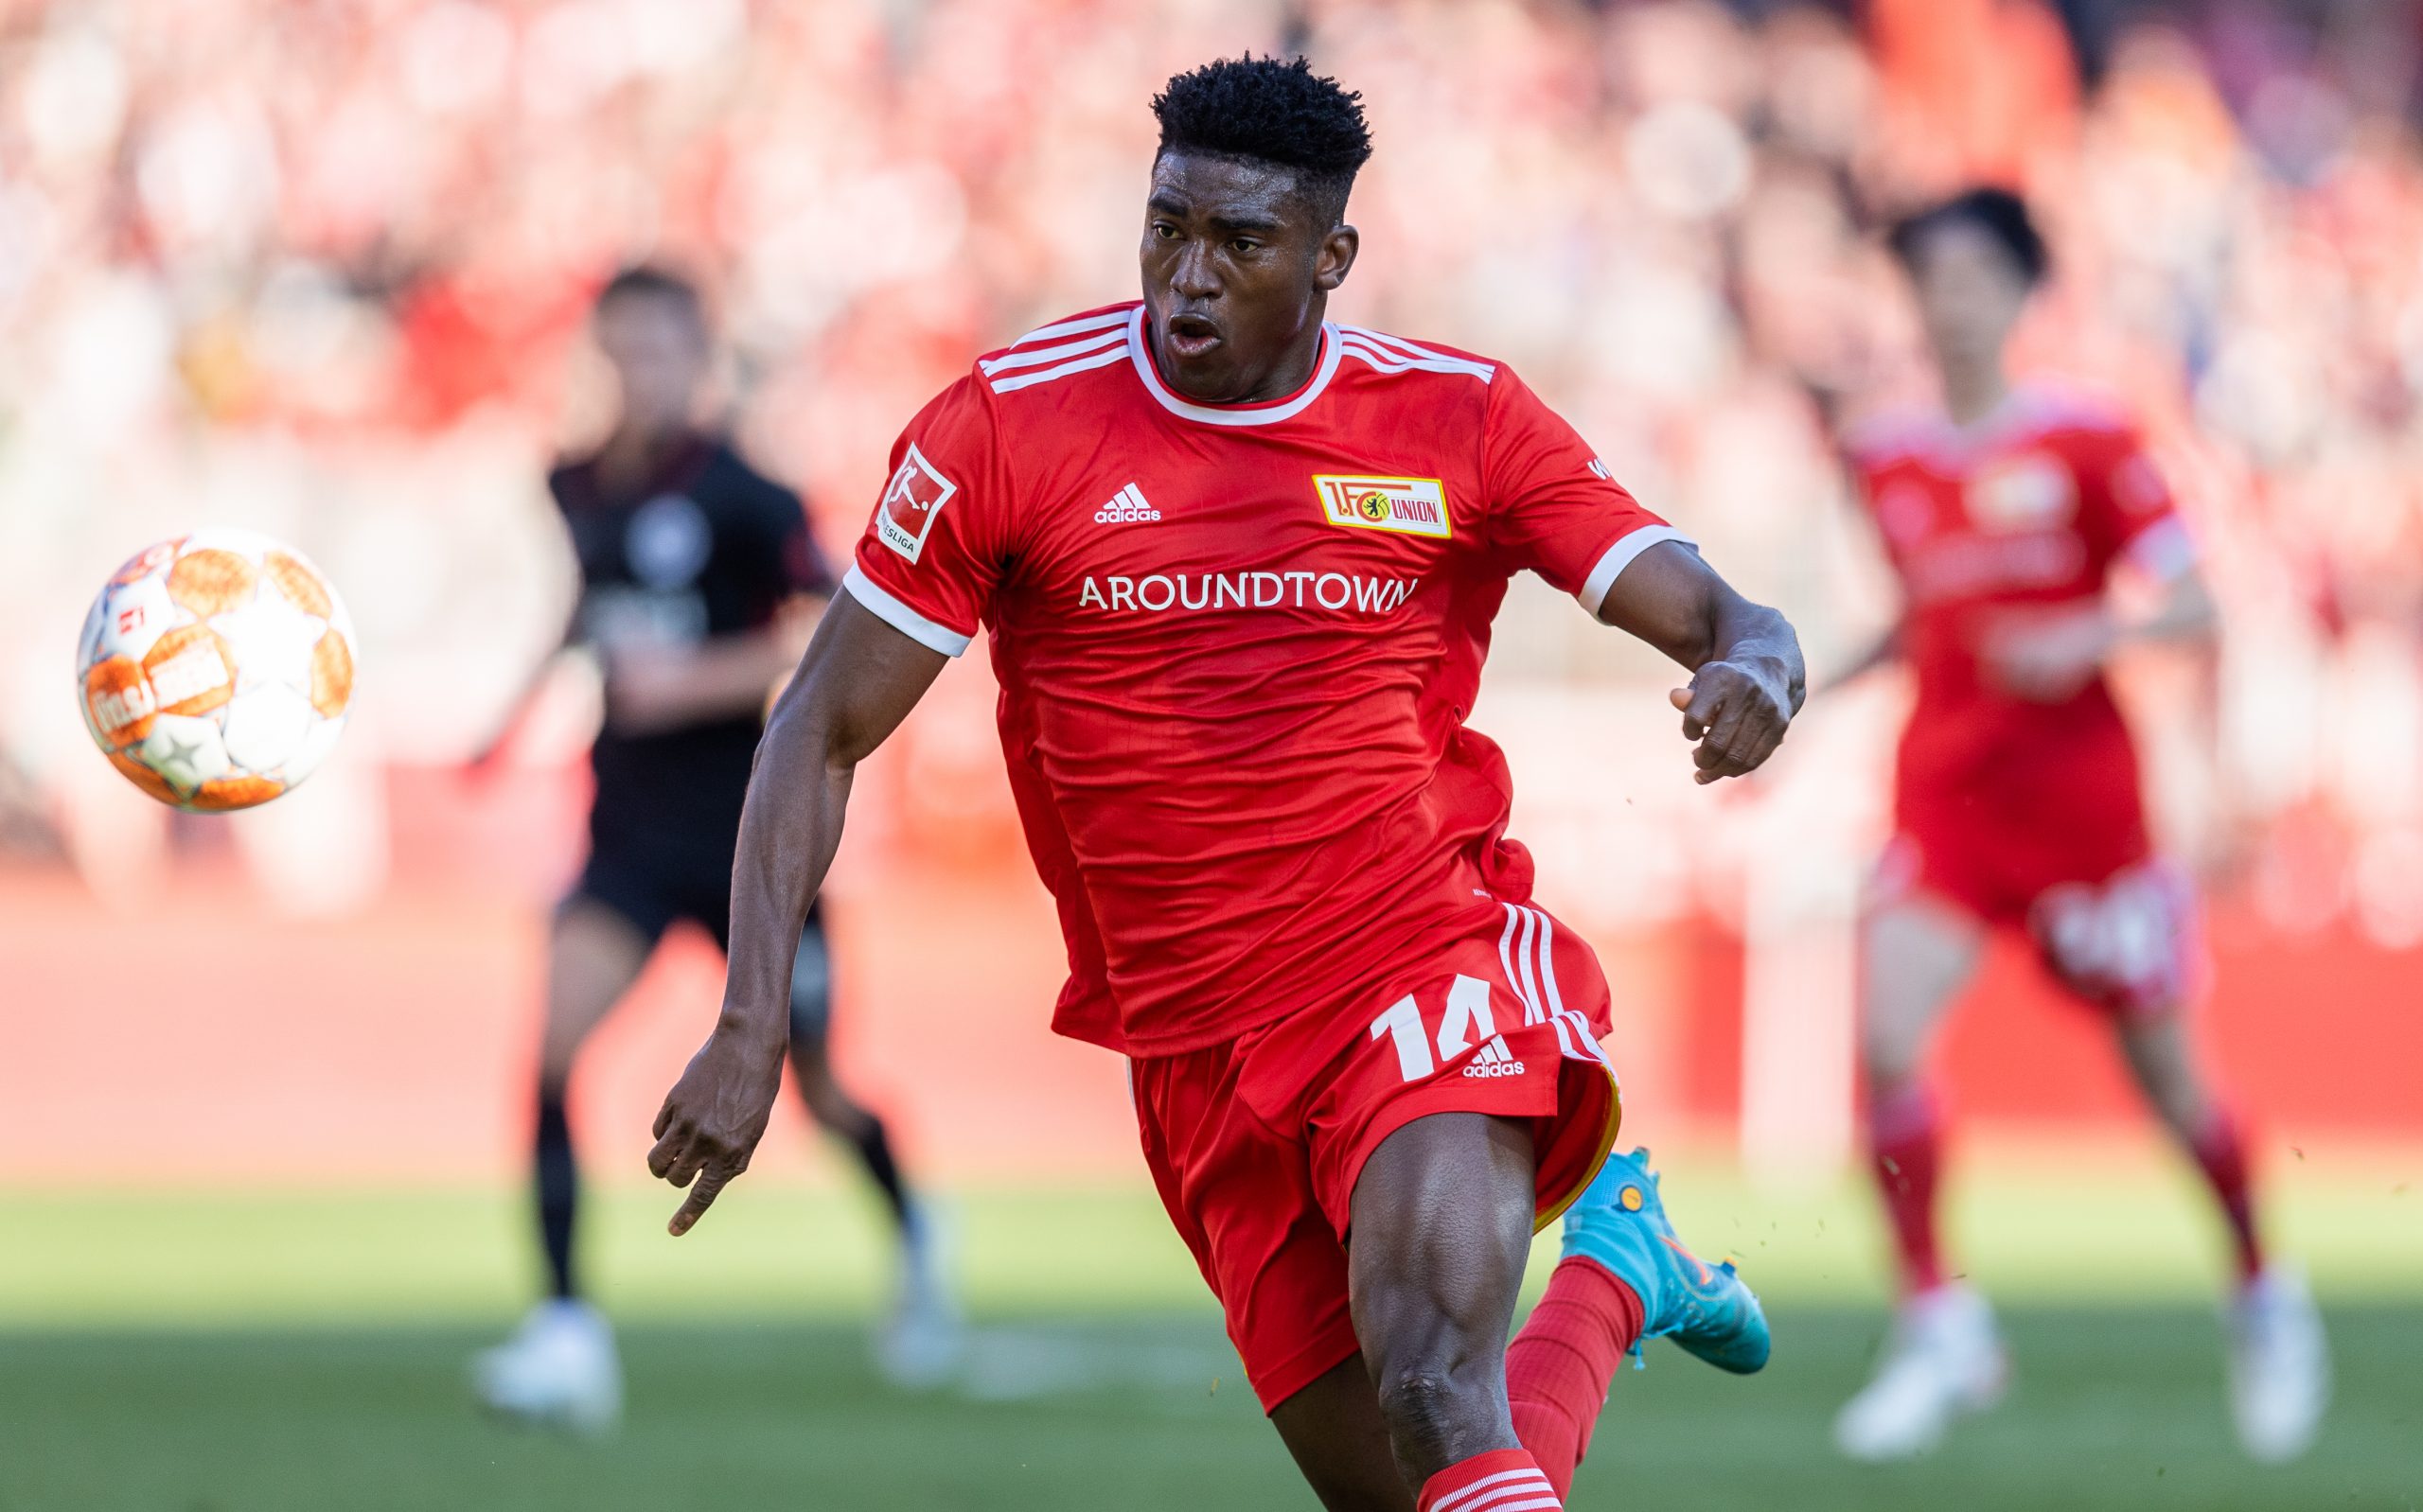 Nottingham Forest interested in Union Berlin forward Taiwo Awoniyi for €20m  - Get German Football News